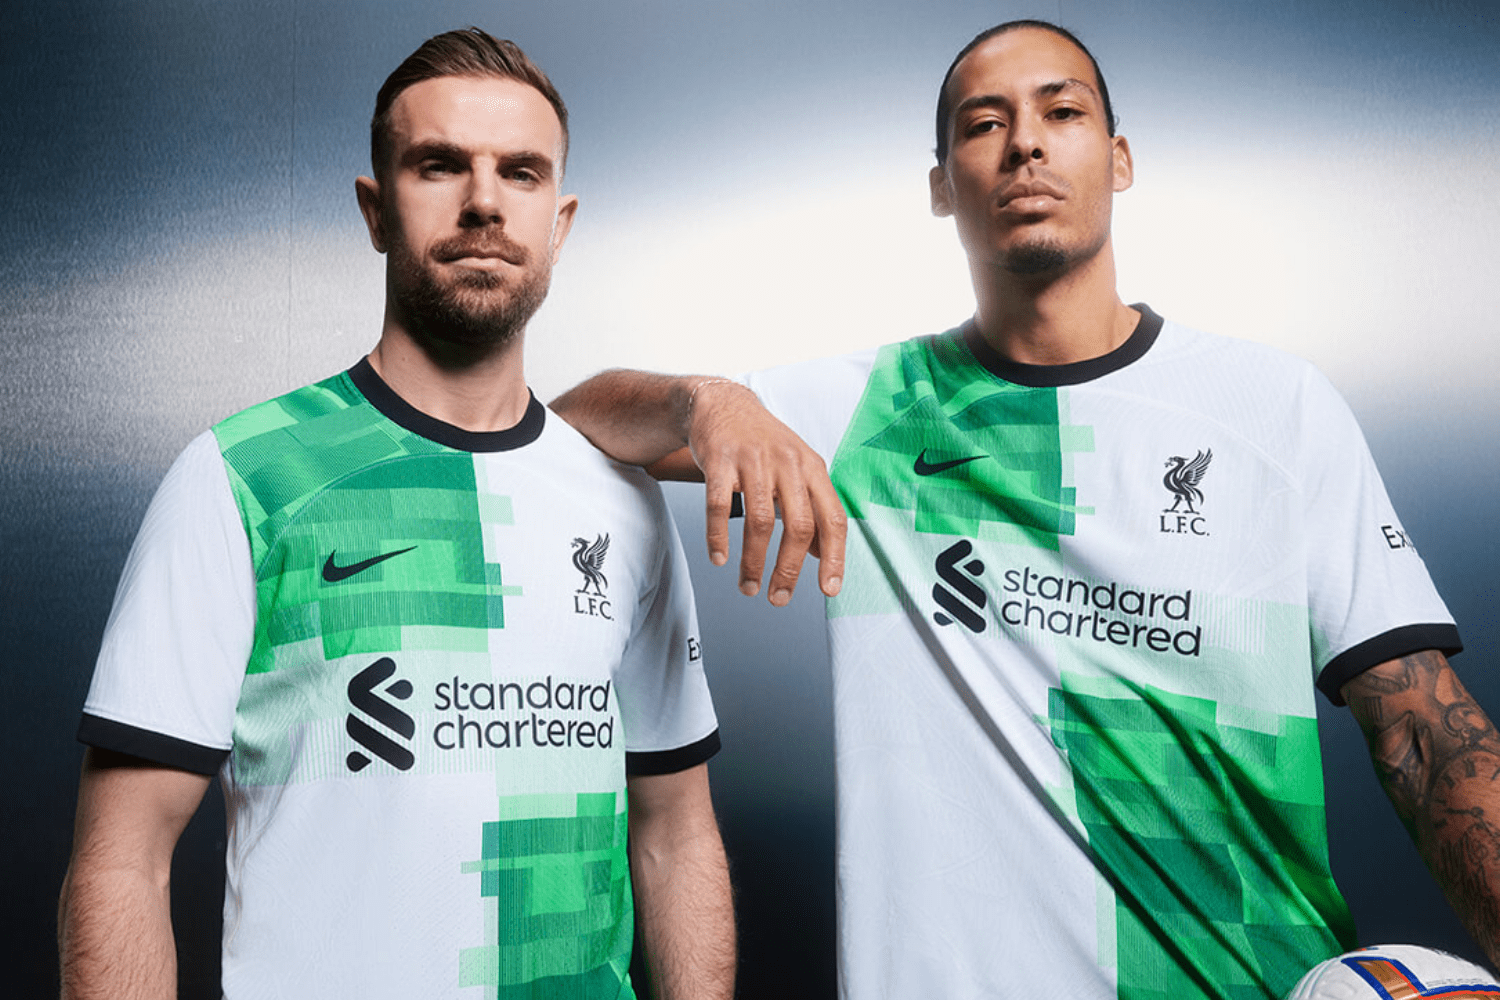 The new Liverpool FC collection with Nike